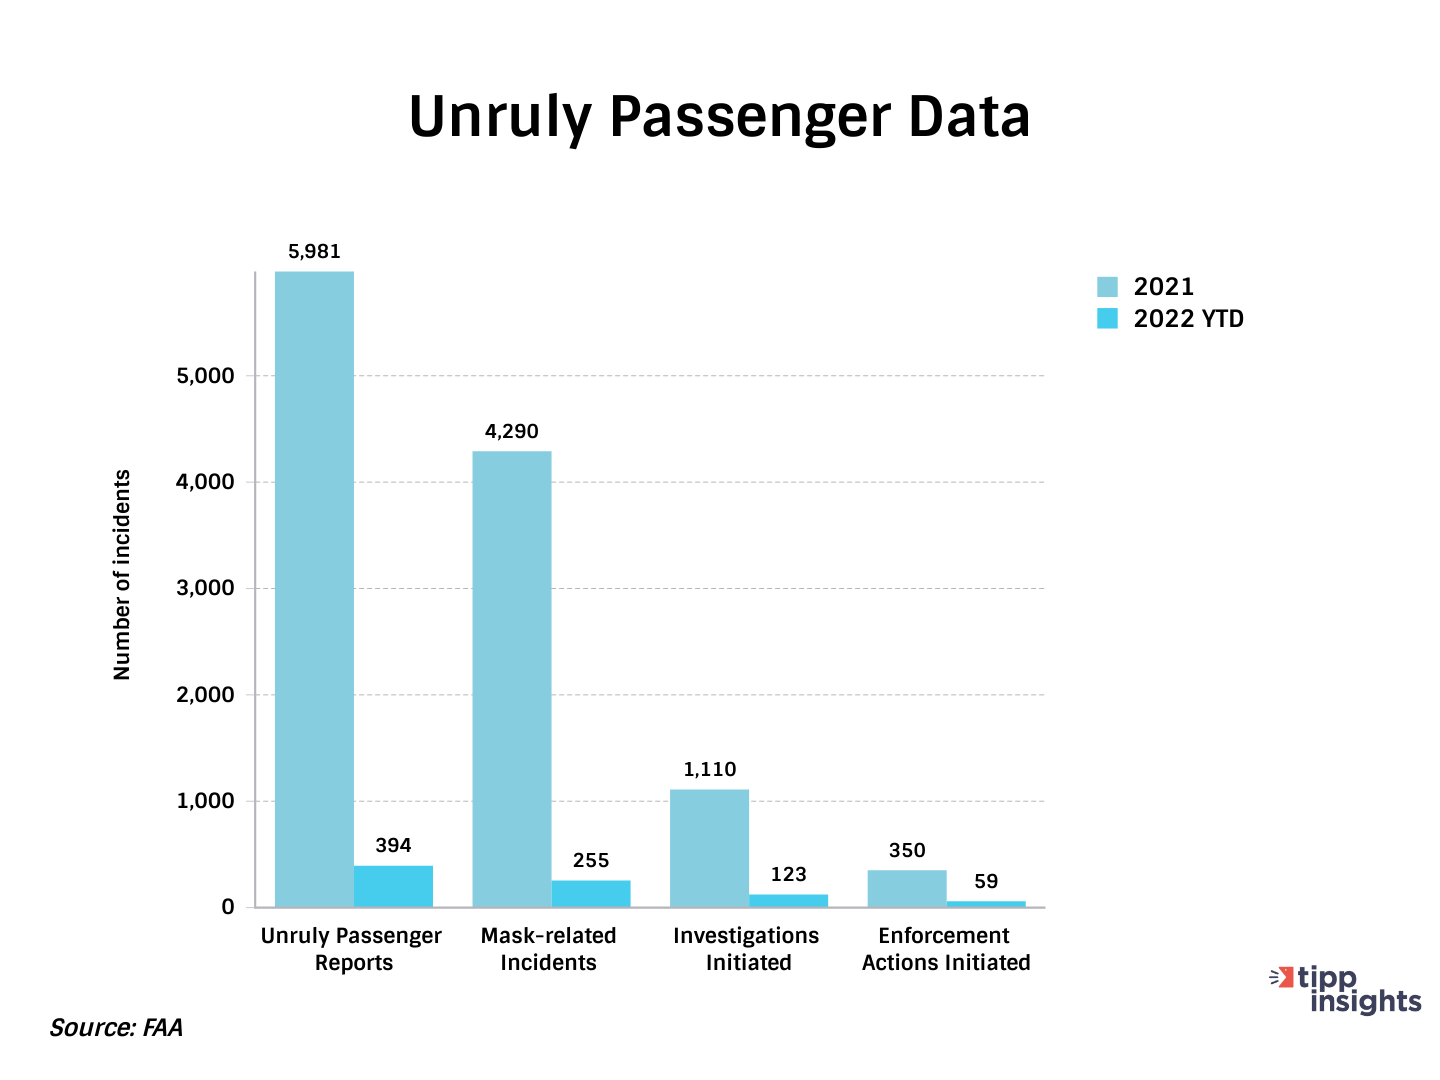 Unruly Airline Passenger data provided by the FAA 2021-2022